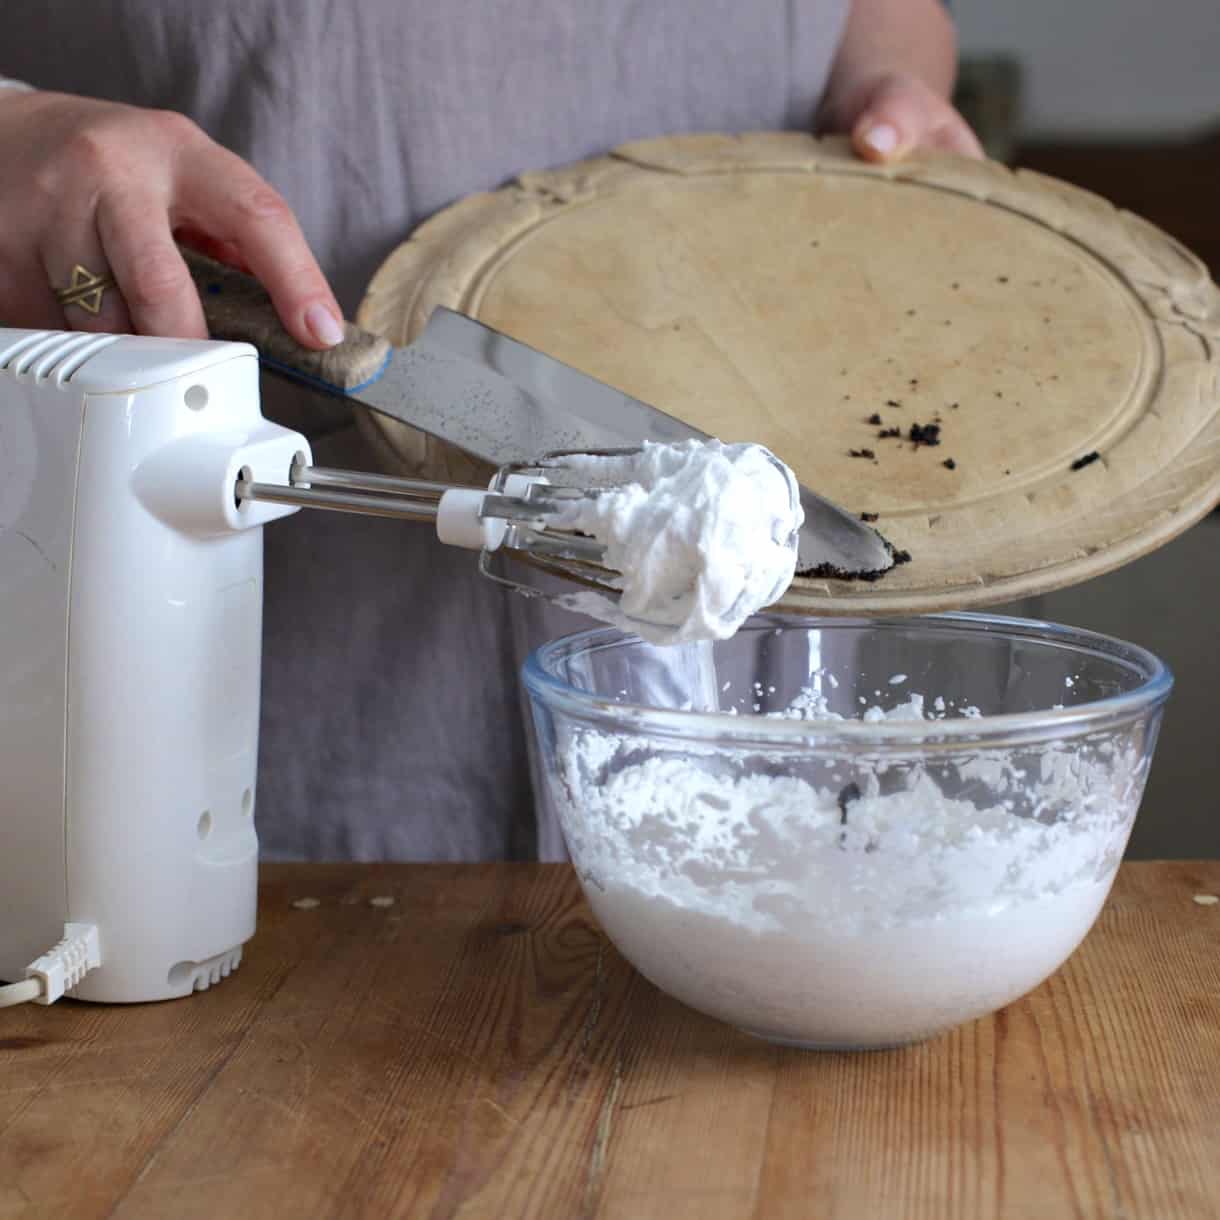 Hand mixer and glass bowl of whipped coconut cream with a woman scraping vanilla beans from a wooden board into the bowl of whipped cream